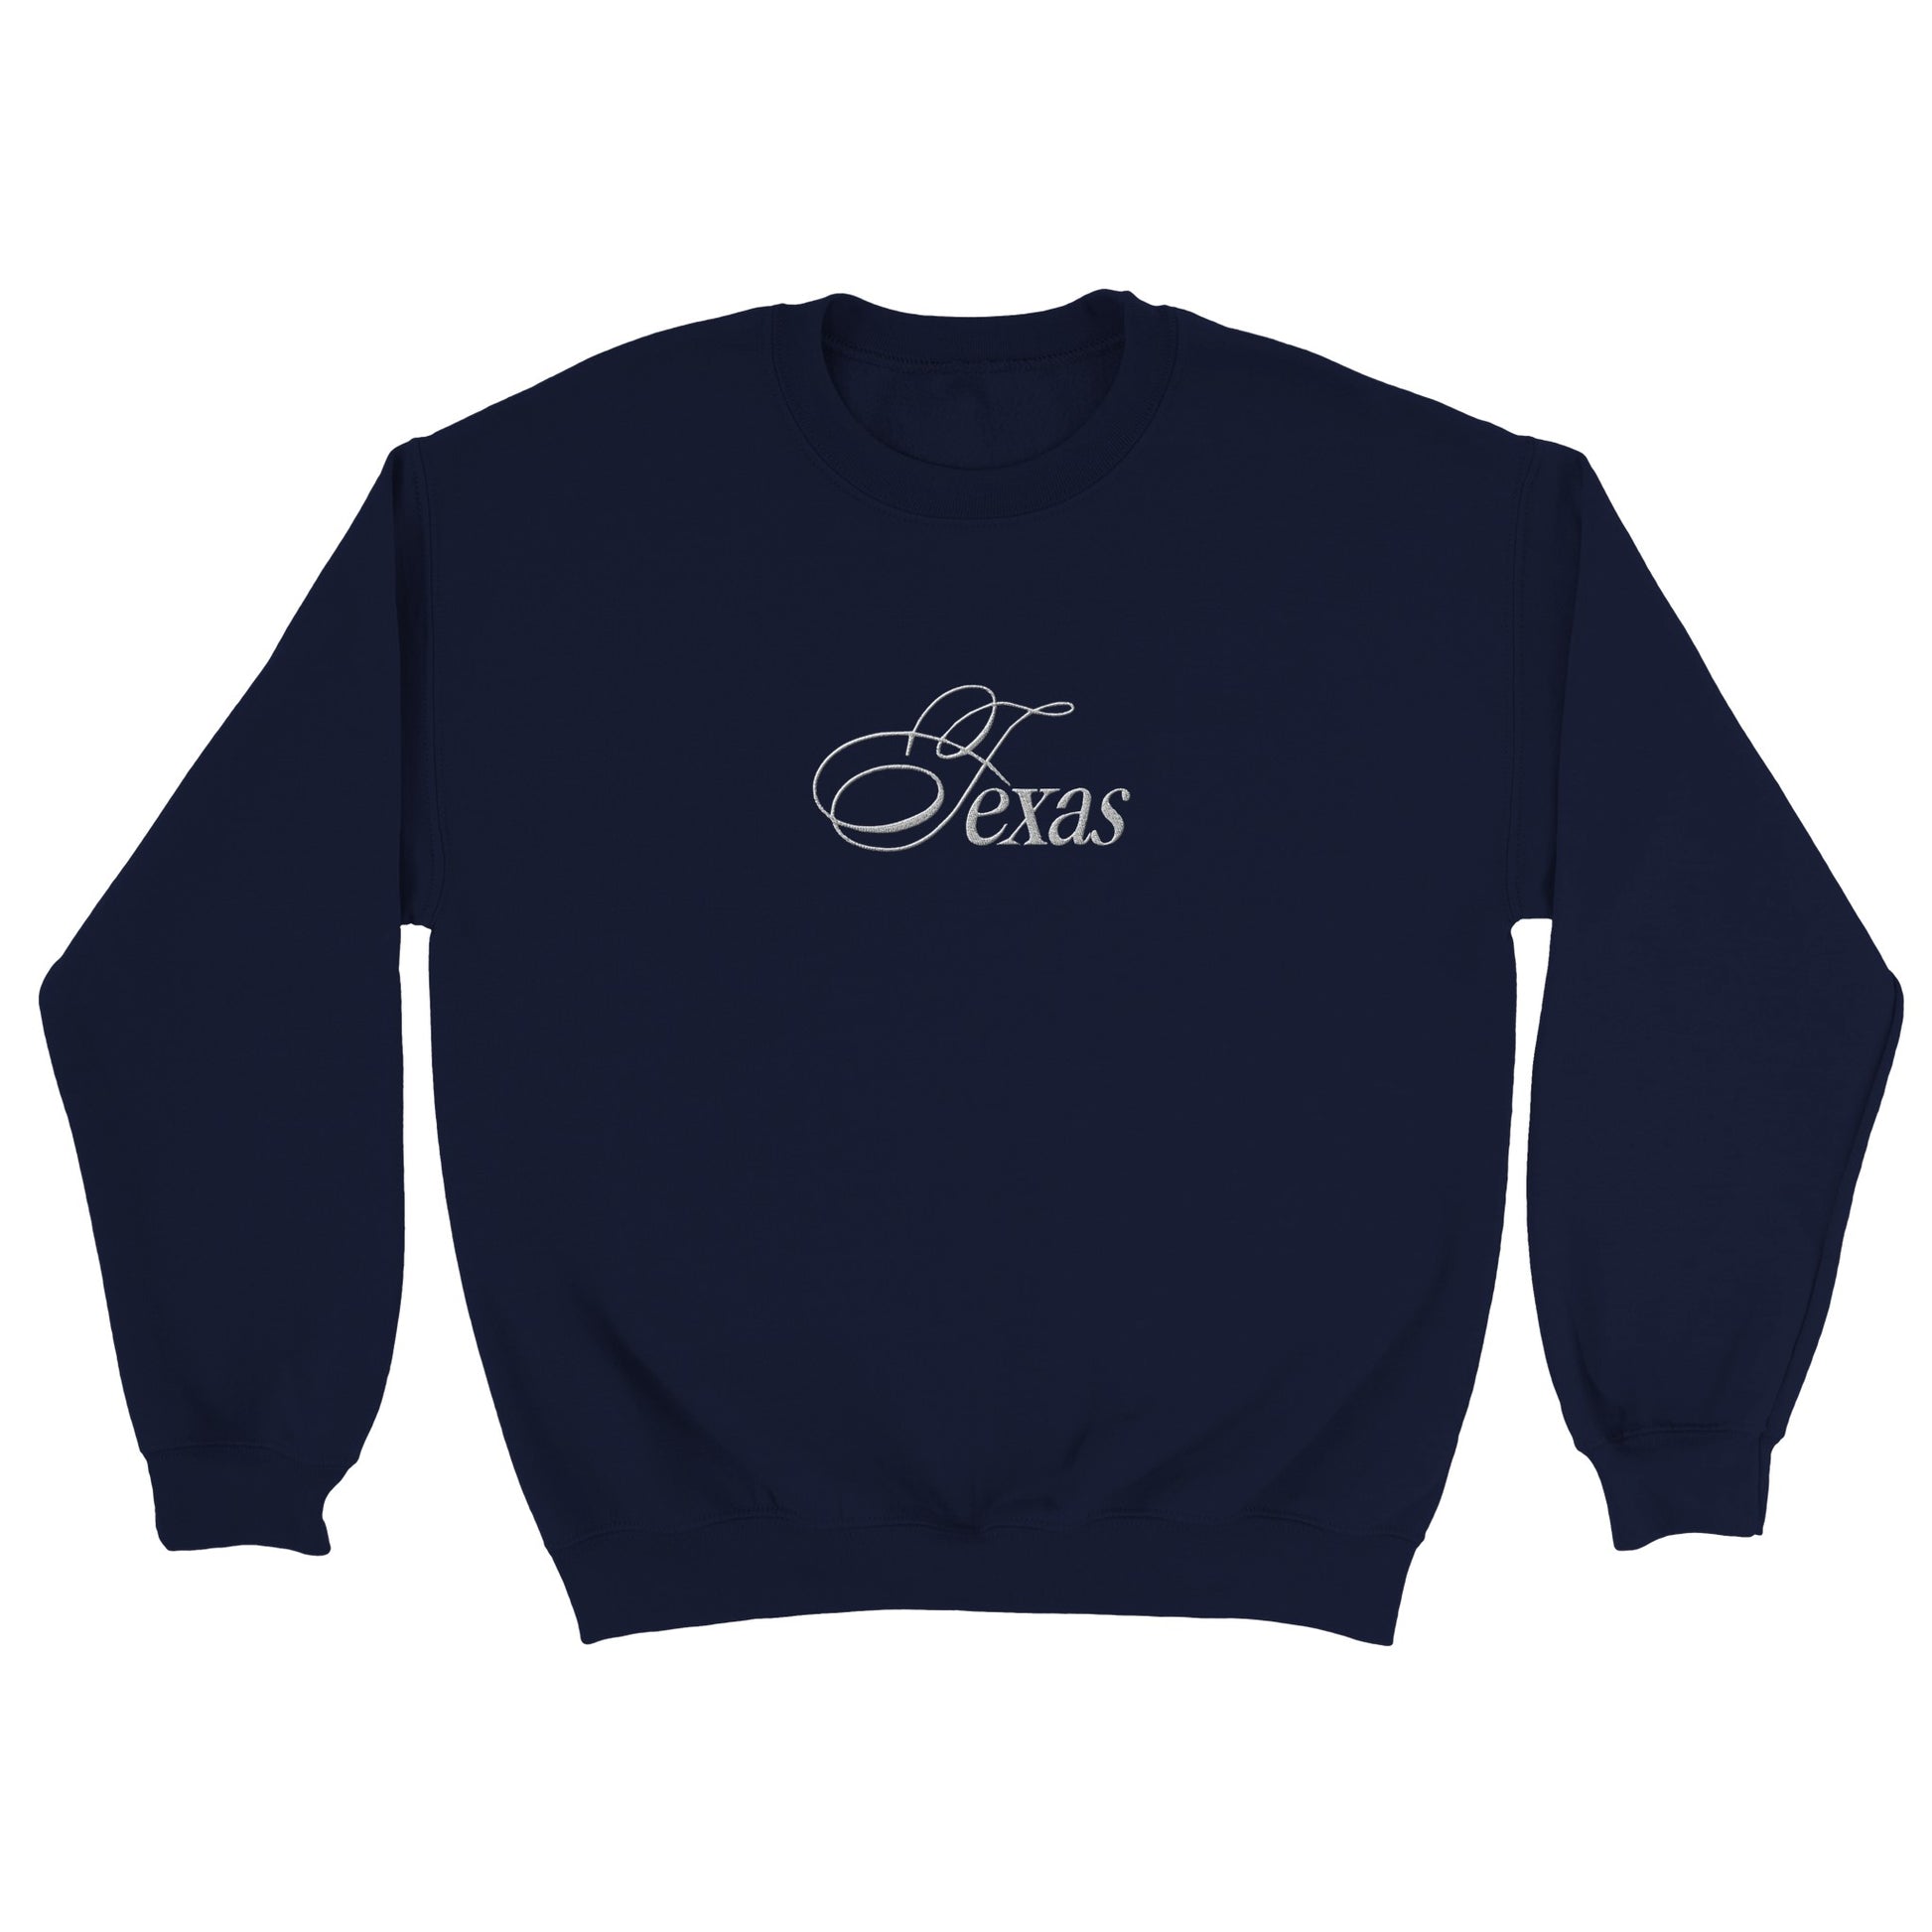 a navy sweatshirt with embroidered text Texas in serif font